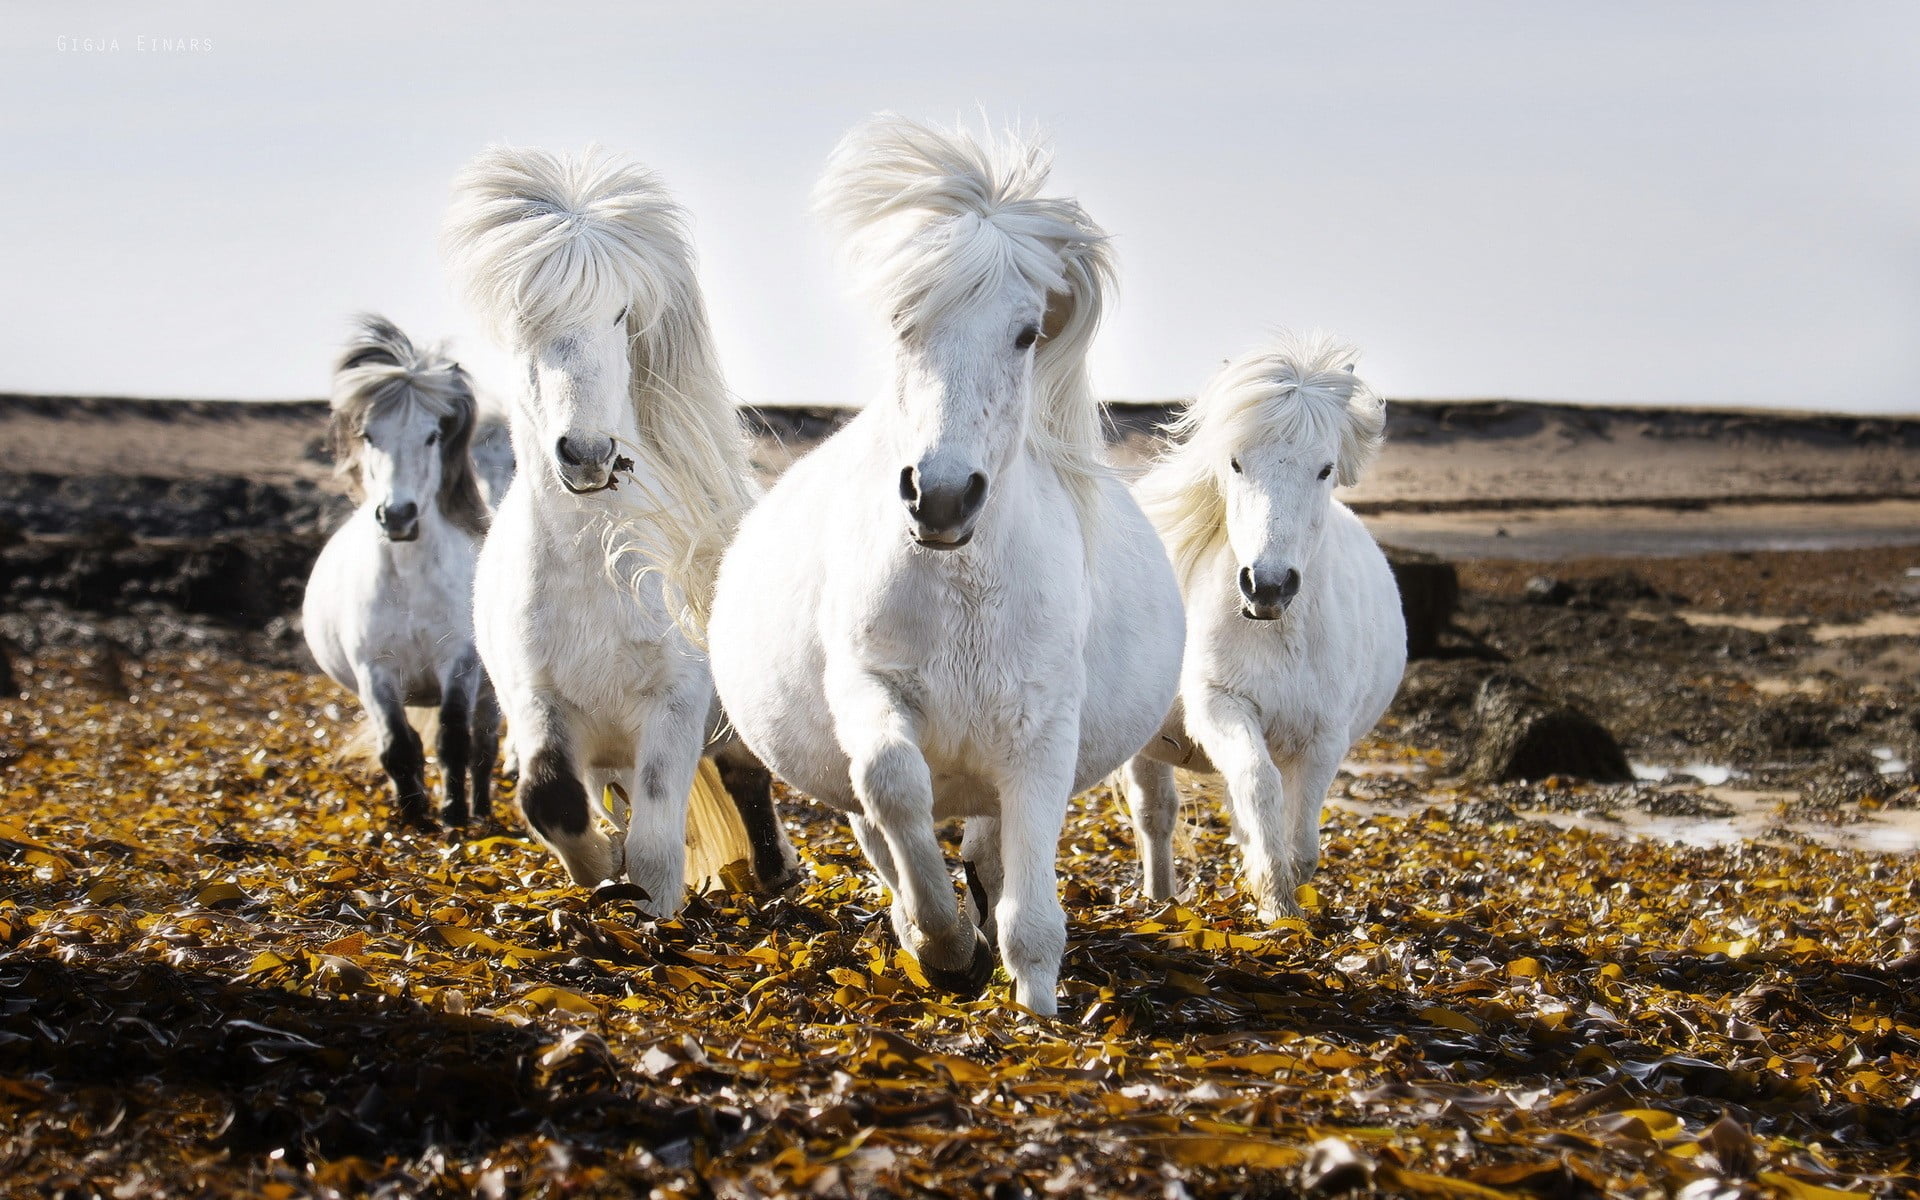 four white horses photo during day time, animals, nature, domestic